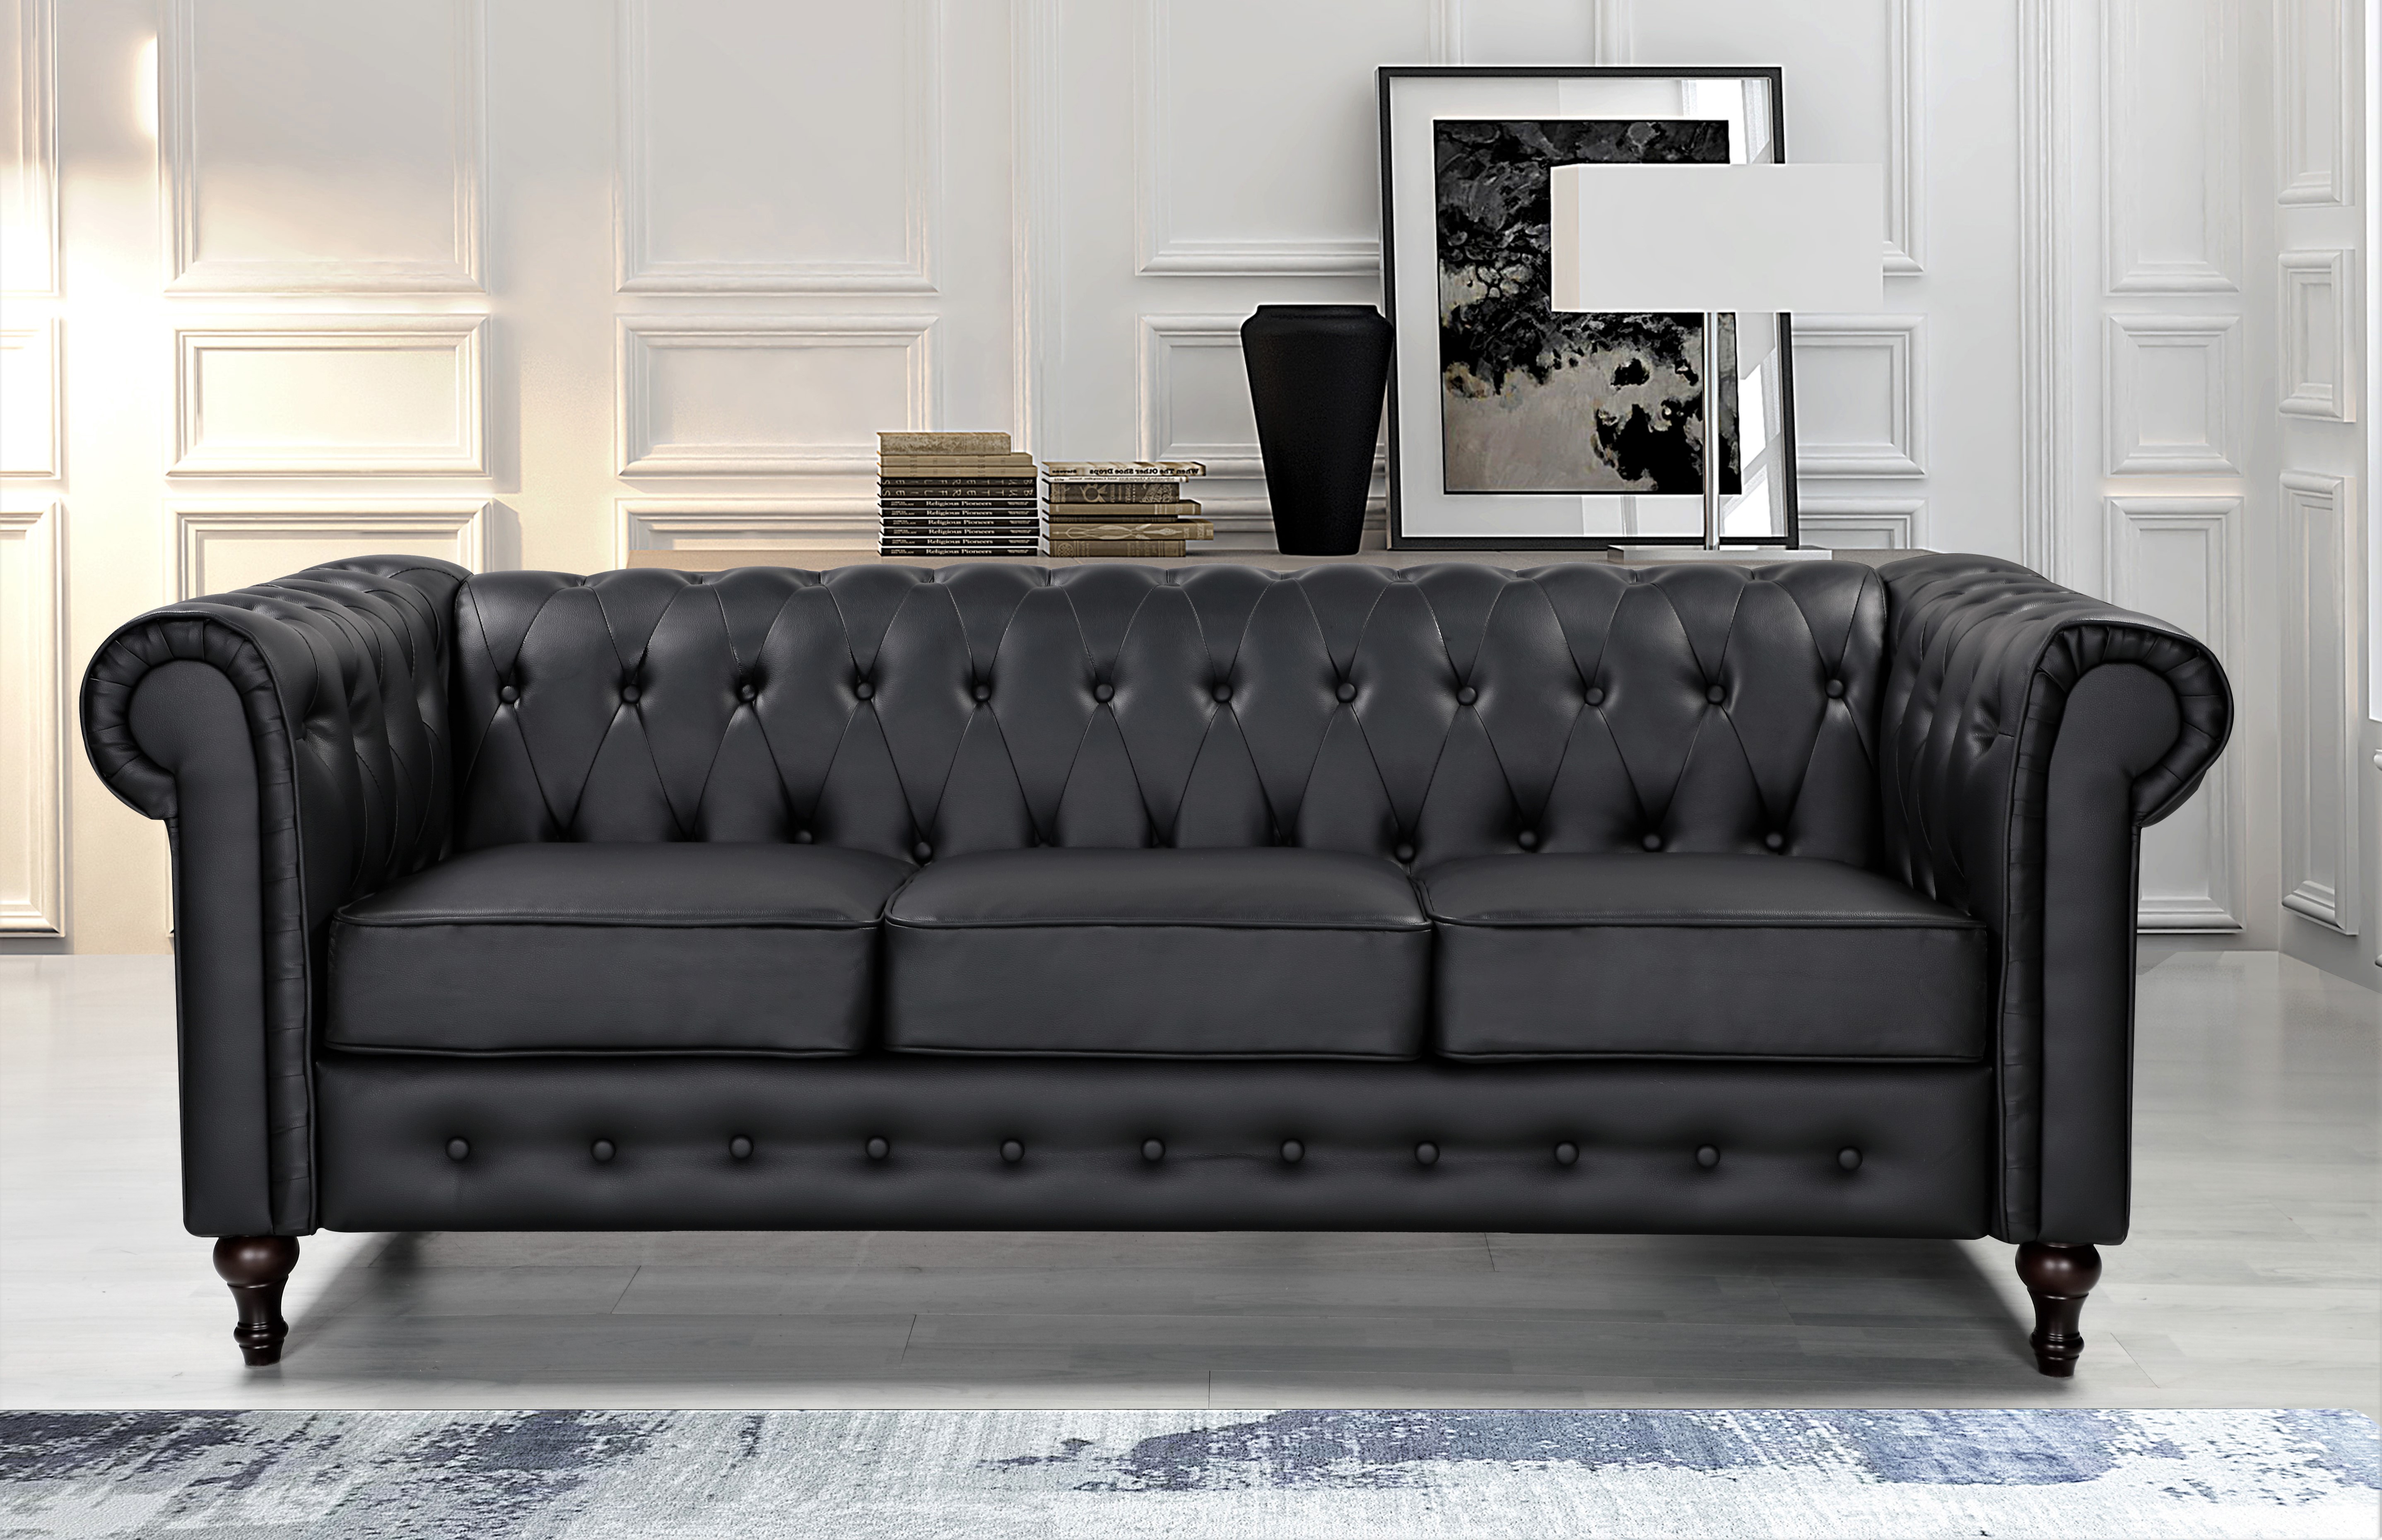 Brooklyn Chesterfield Faux Leather Sofa, Faux Leather Couches